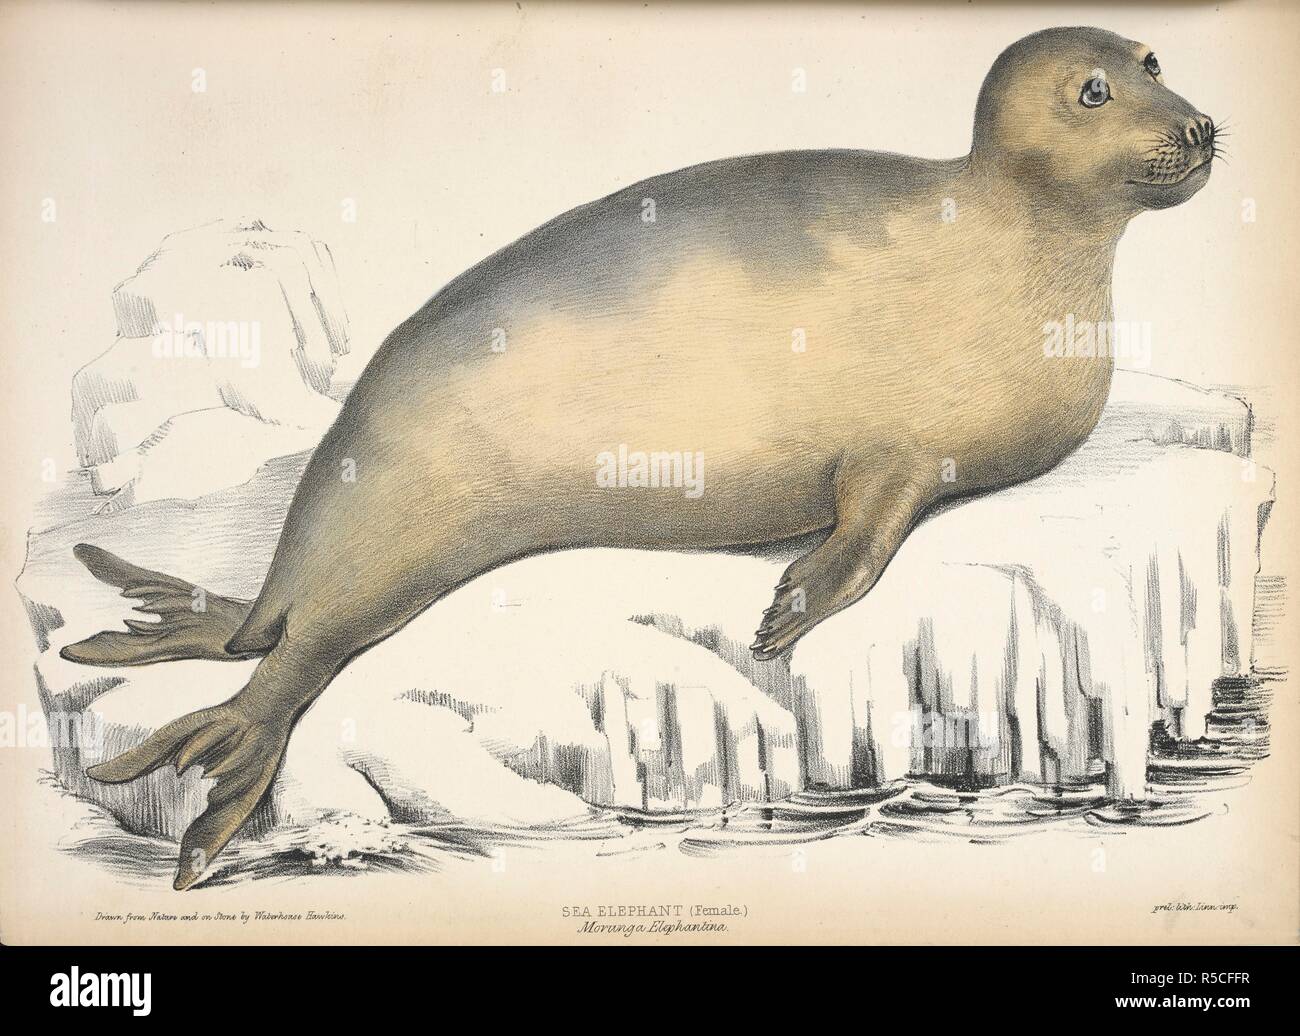 Sea elephant (female.)  The Elephant seal. The Zoology of the Voyage of H.M.S. Erebus and Terror, under the command of Capt. Sir James Clark Ross during the years 1839 to 1843 ... London, 1844-75. Source: 10498.dd.3 plate 9. Author: Richardson, John, Sir, M. D. Hawkins, Waterhouse. Stock Photo